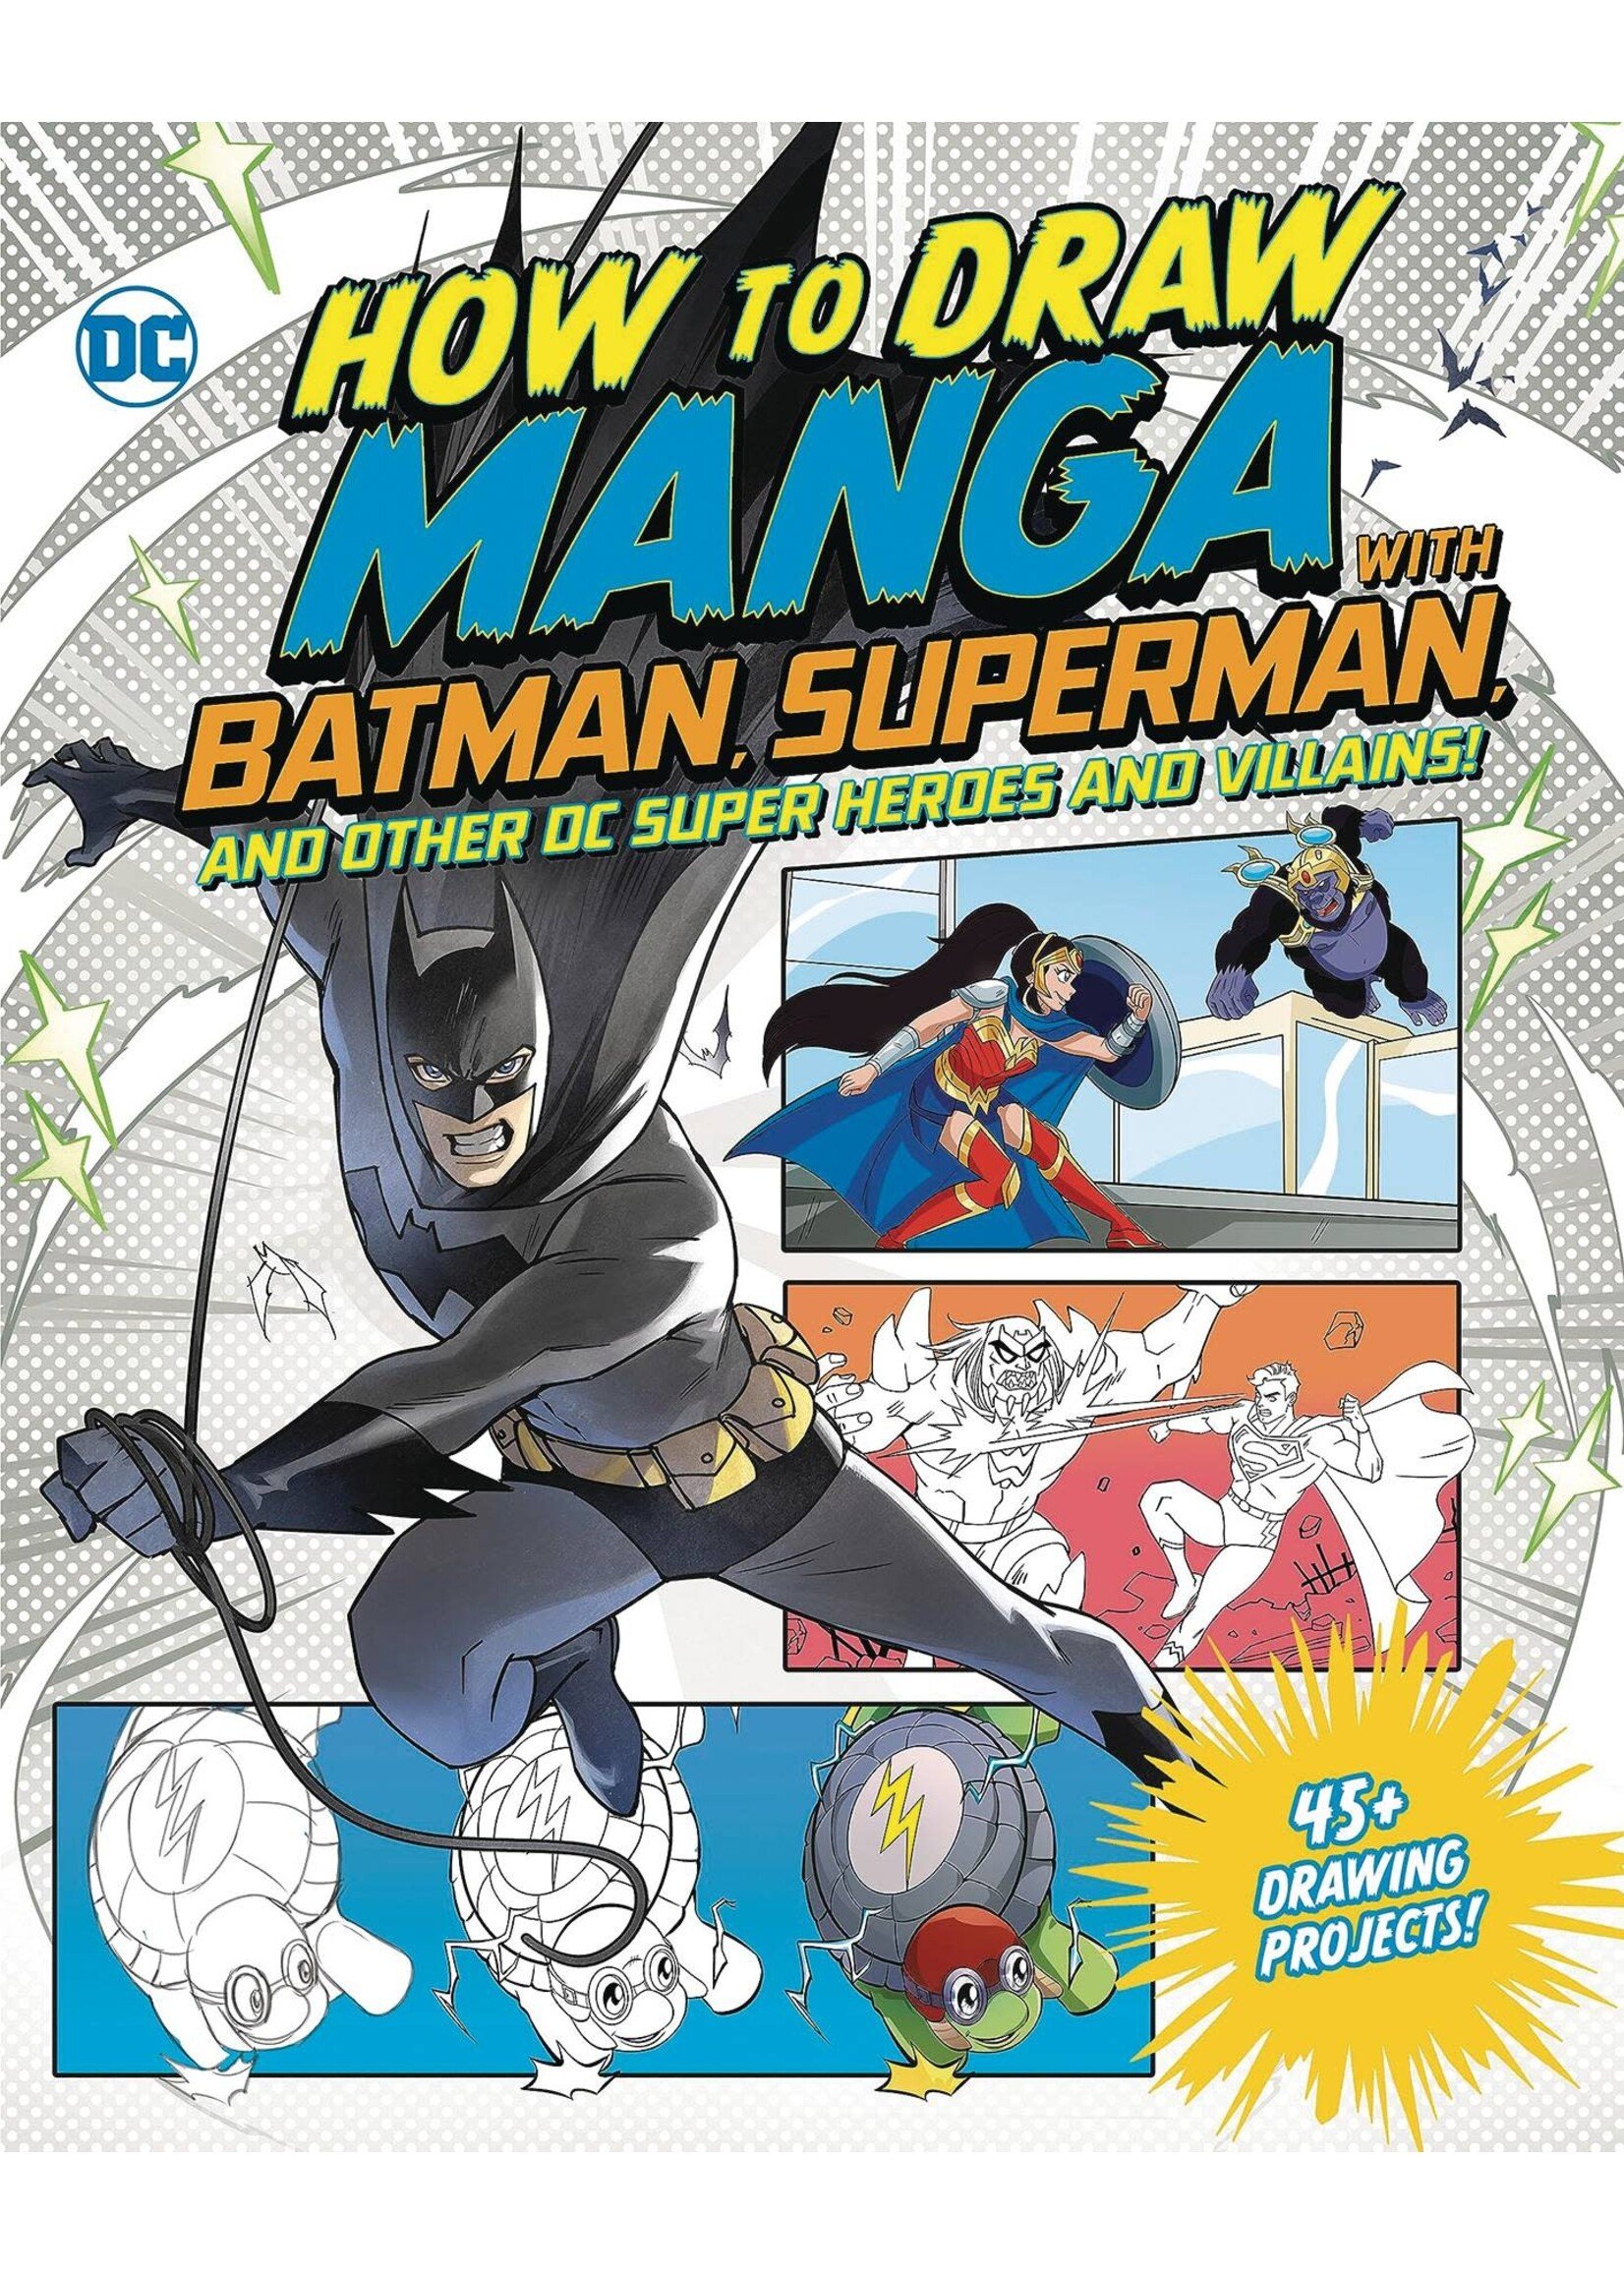 CAPSTONE PRESS HOW TO DRAW MANGA WITH BATMAN SUPERMAN OTHER HEROES